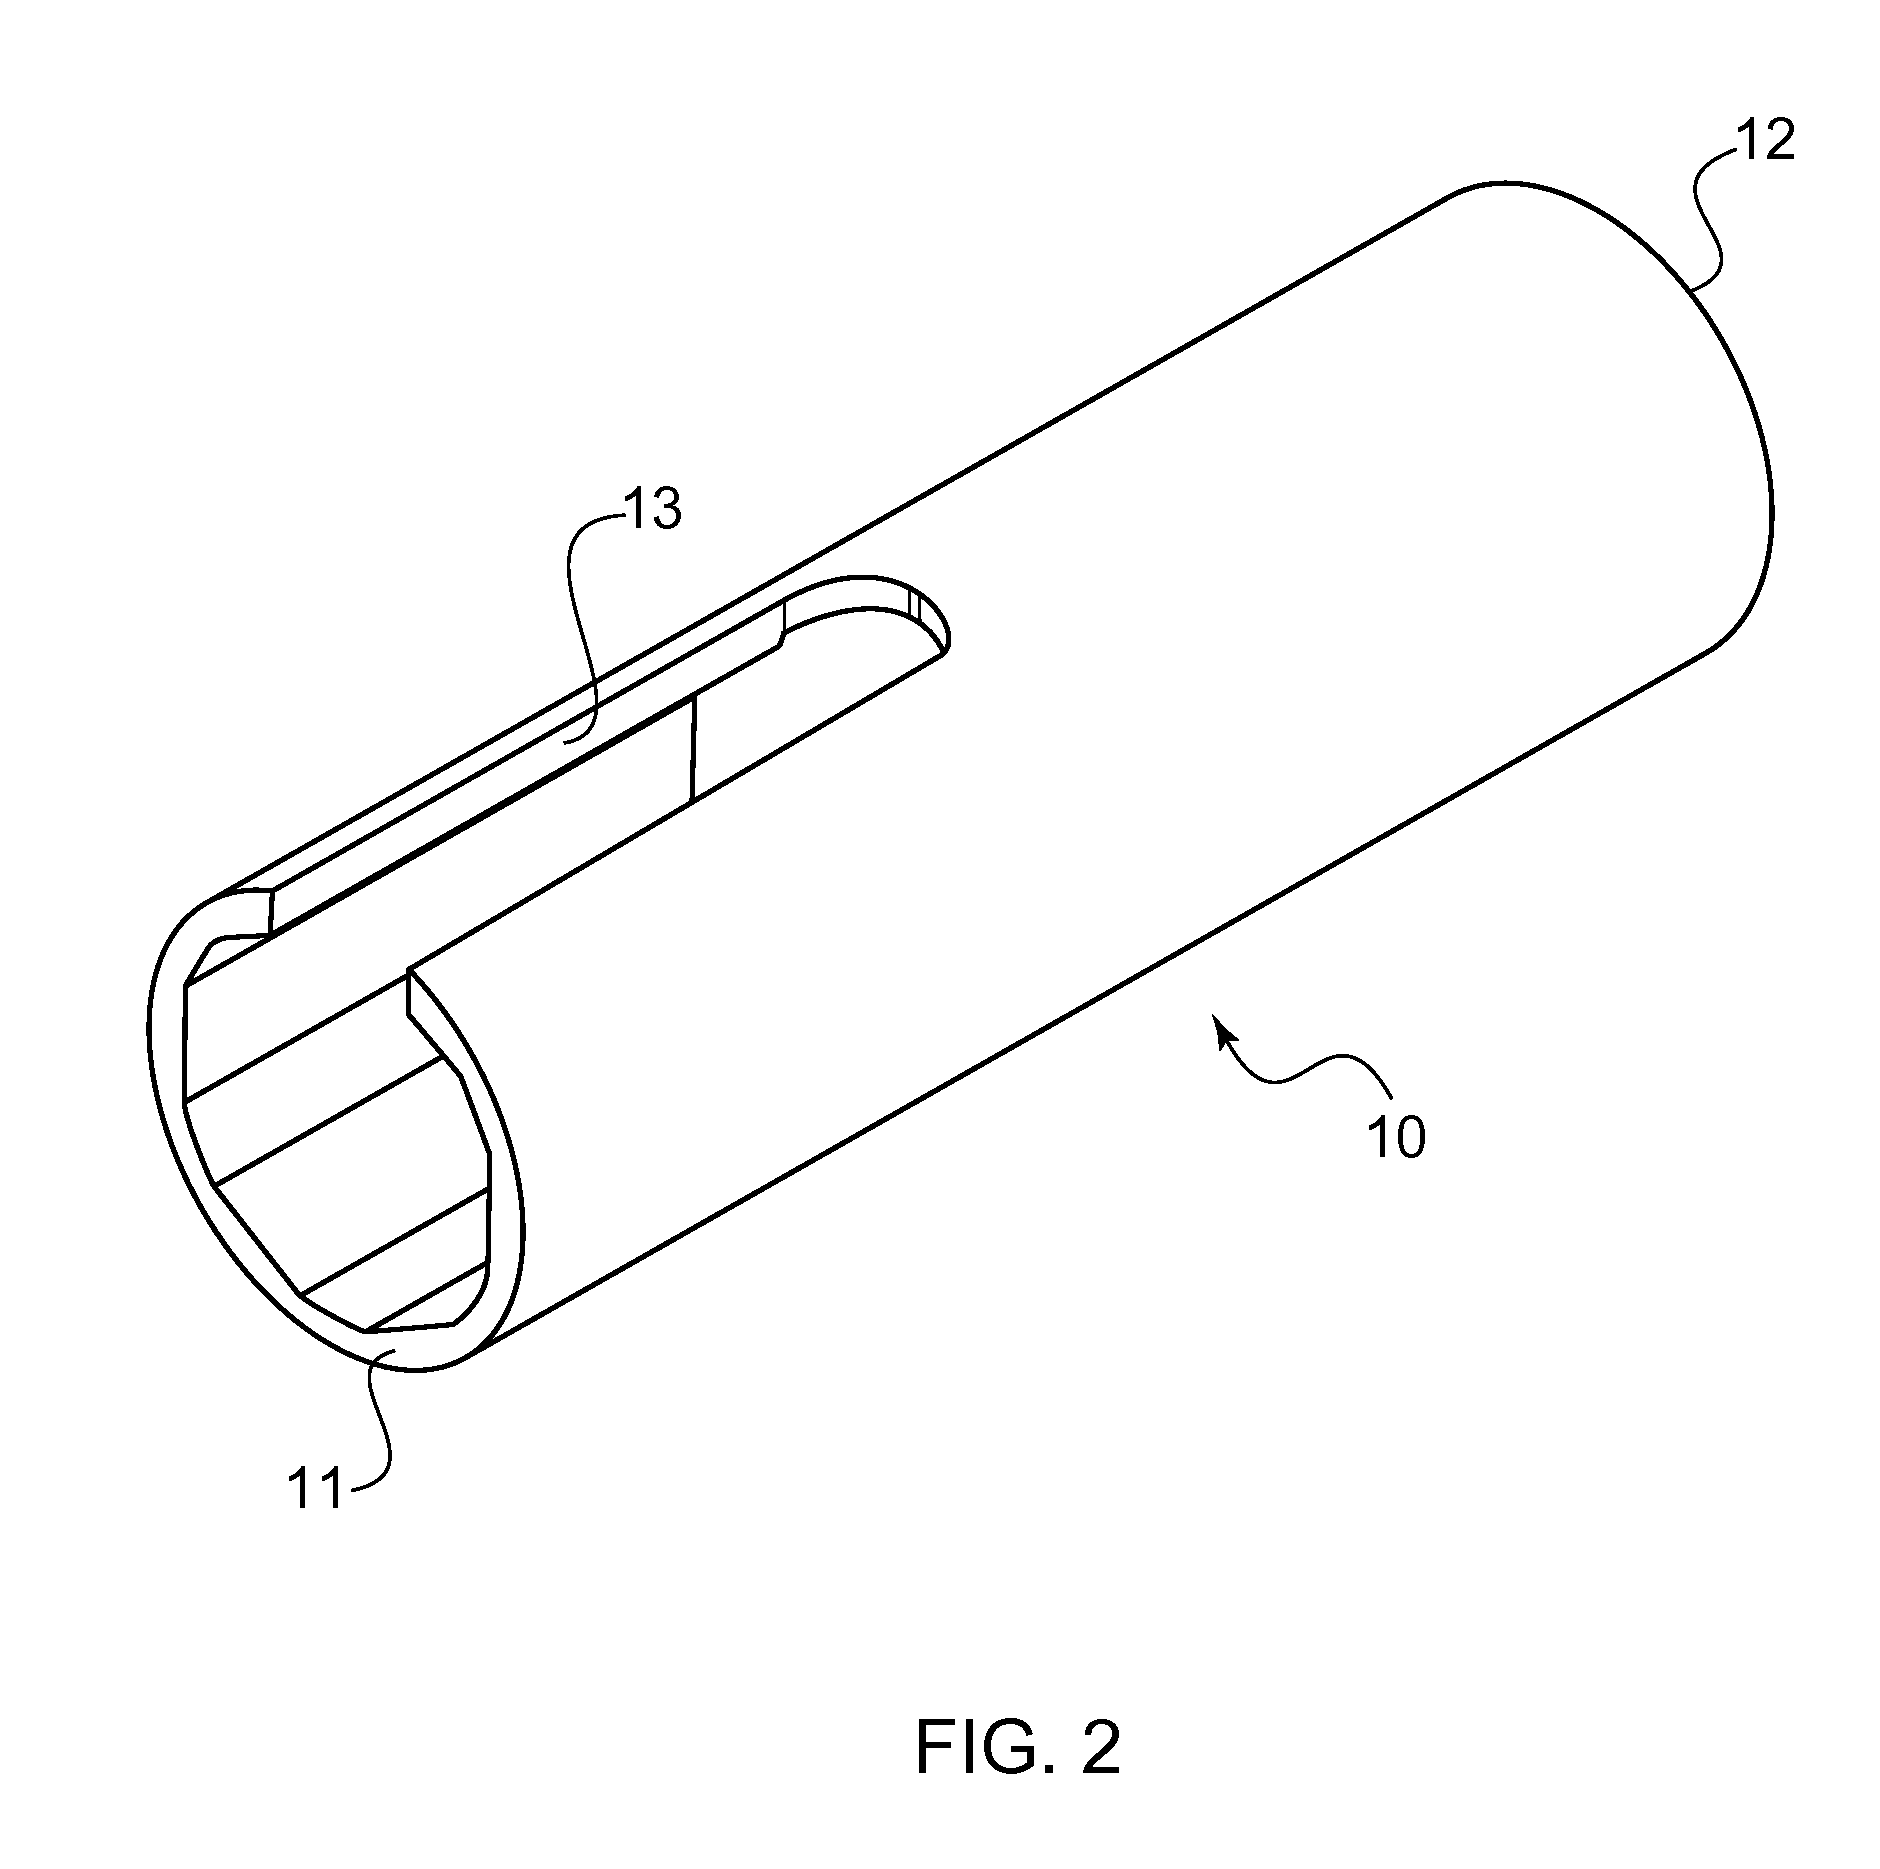 Cosmetic applicators containing heating elements